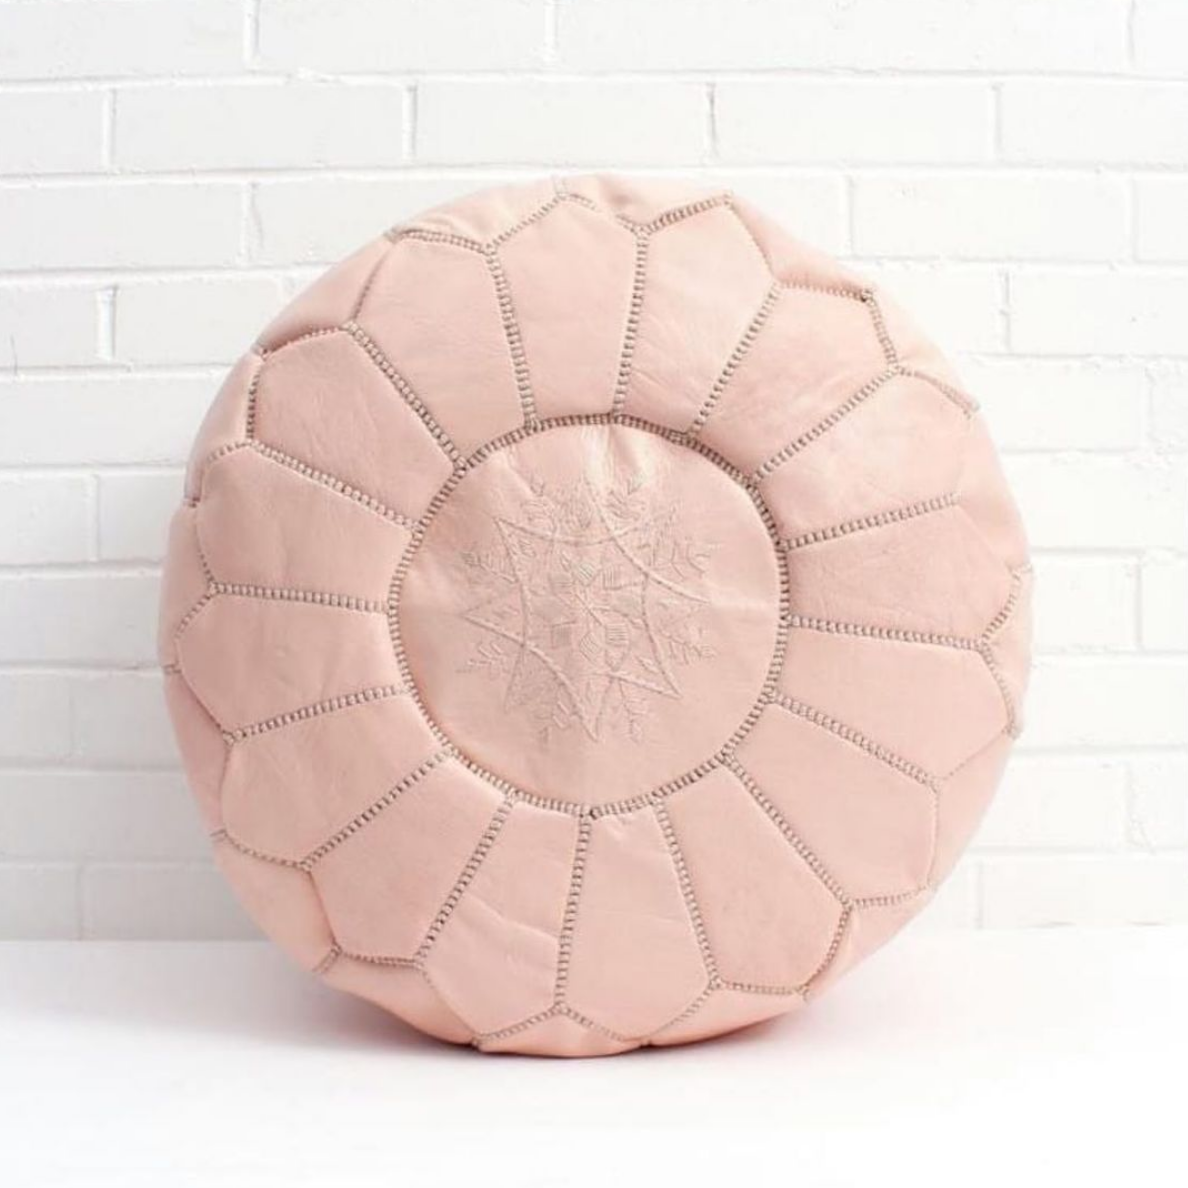 Moroccan Pouf, How To Fill Your Moroccan Pouf - 3 Ways